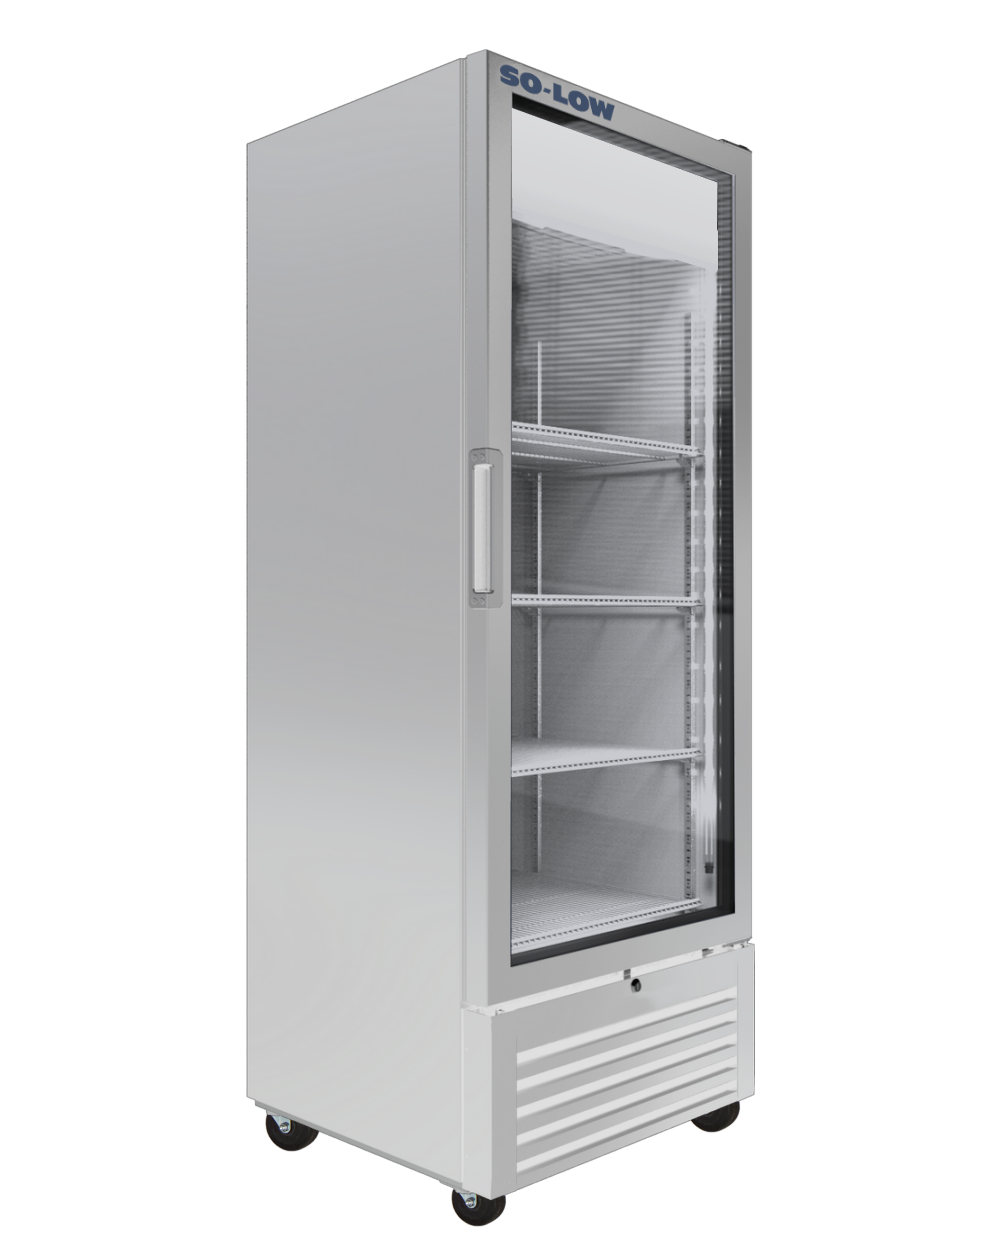 So-Low 2ºC to 8ºC, 15 cu. ft., one glass door, Cycle defrost, 115v